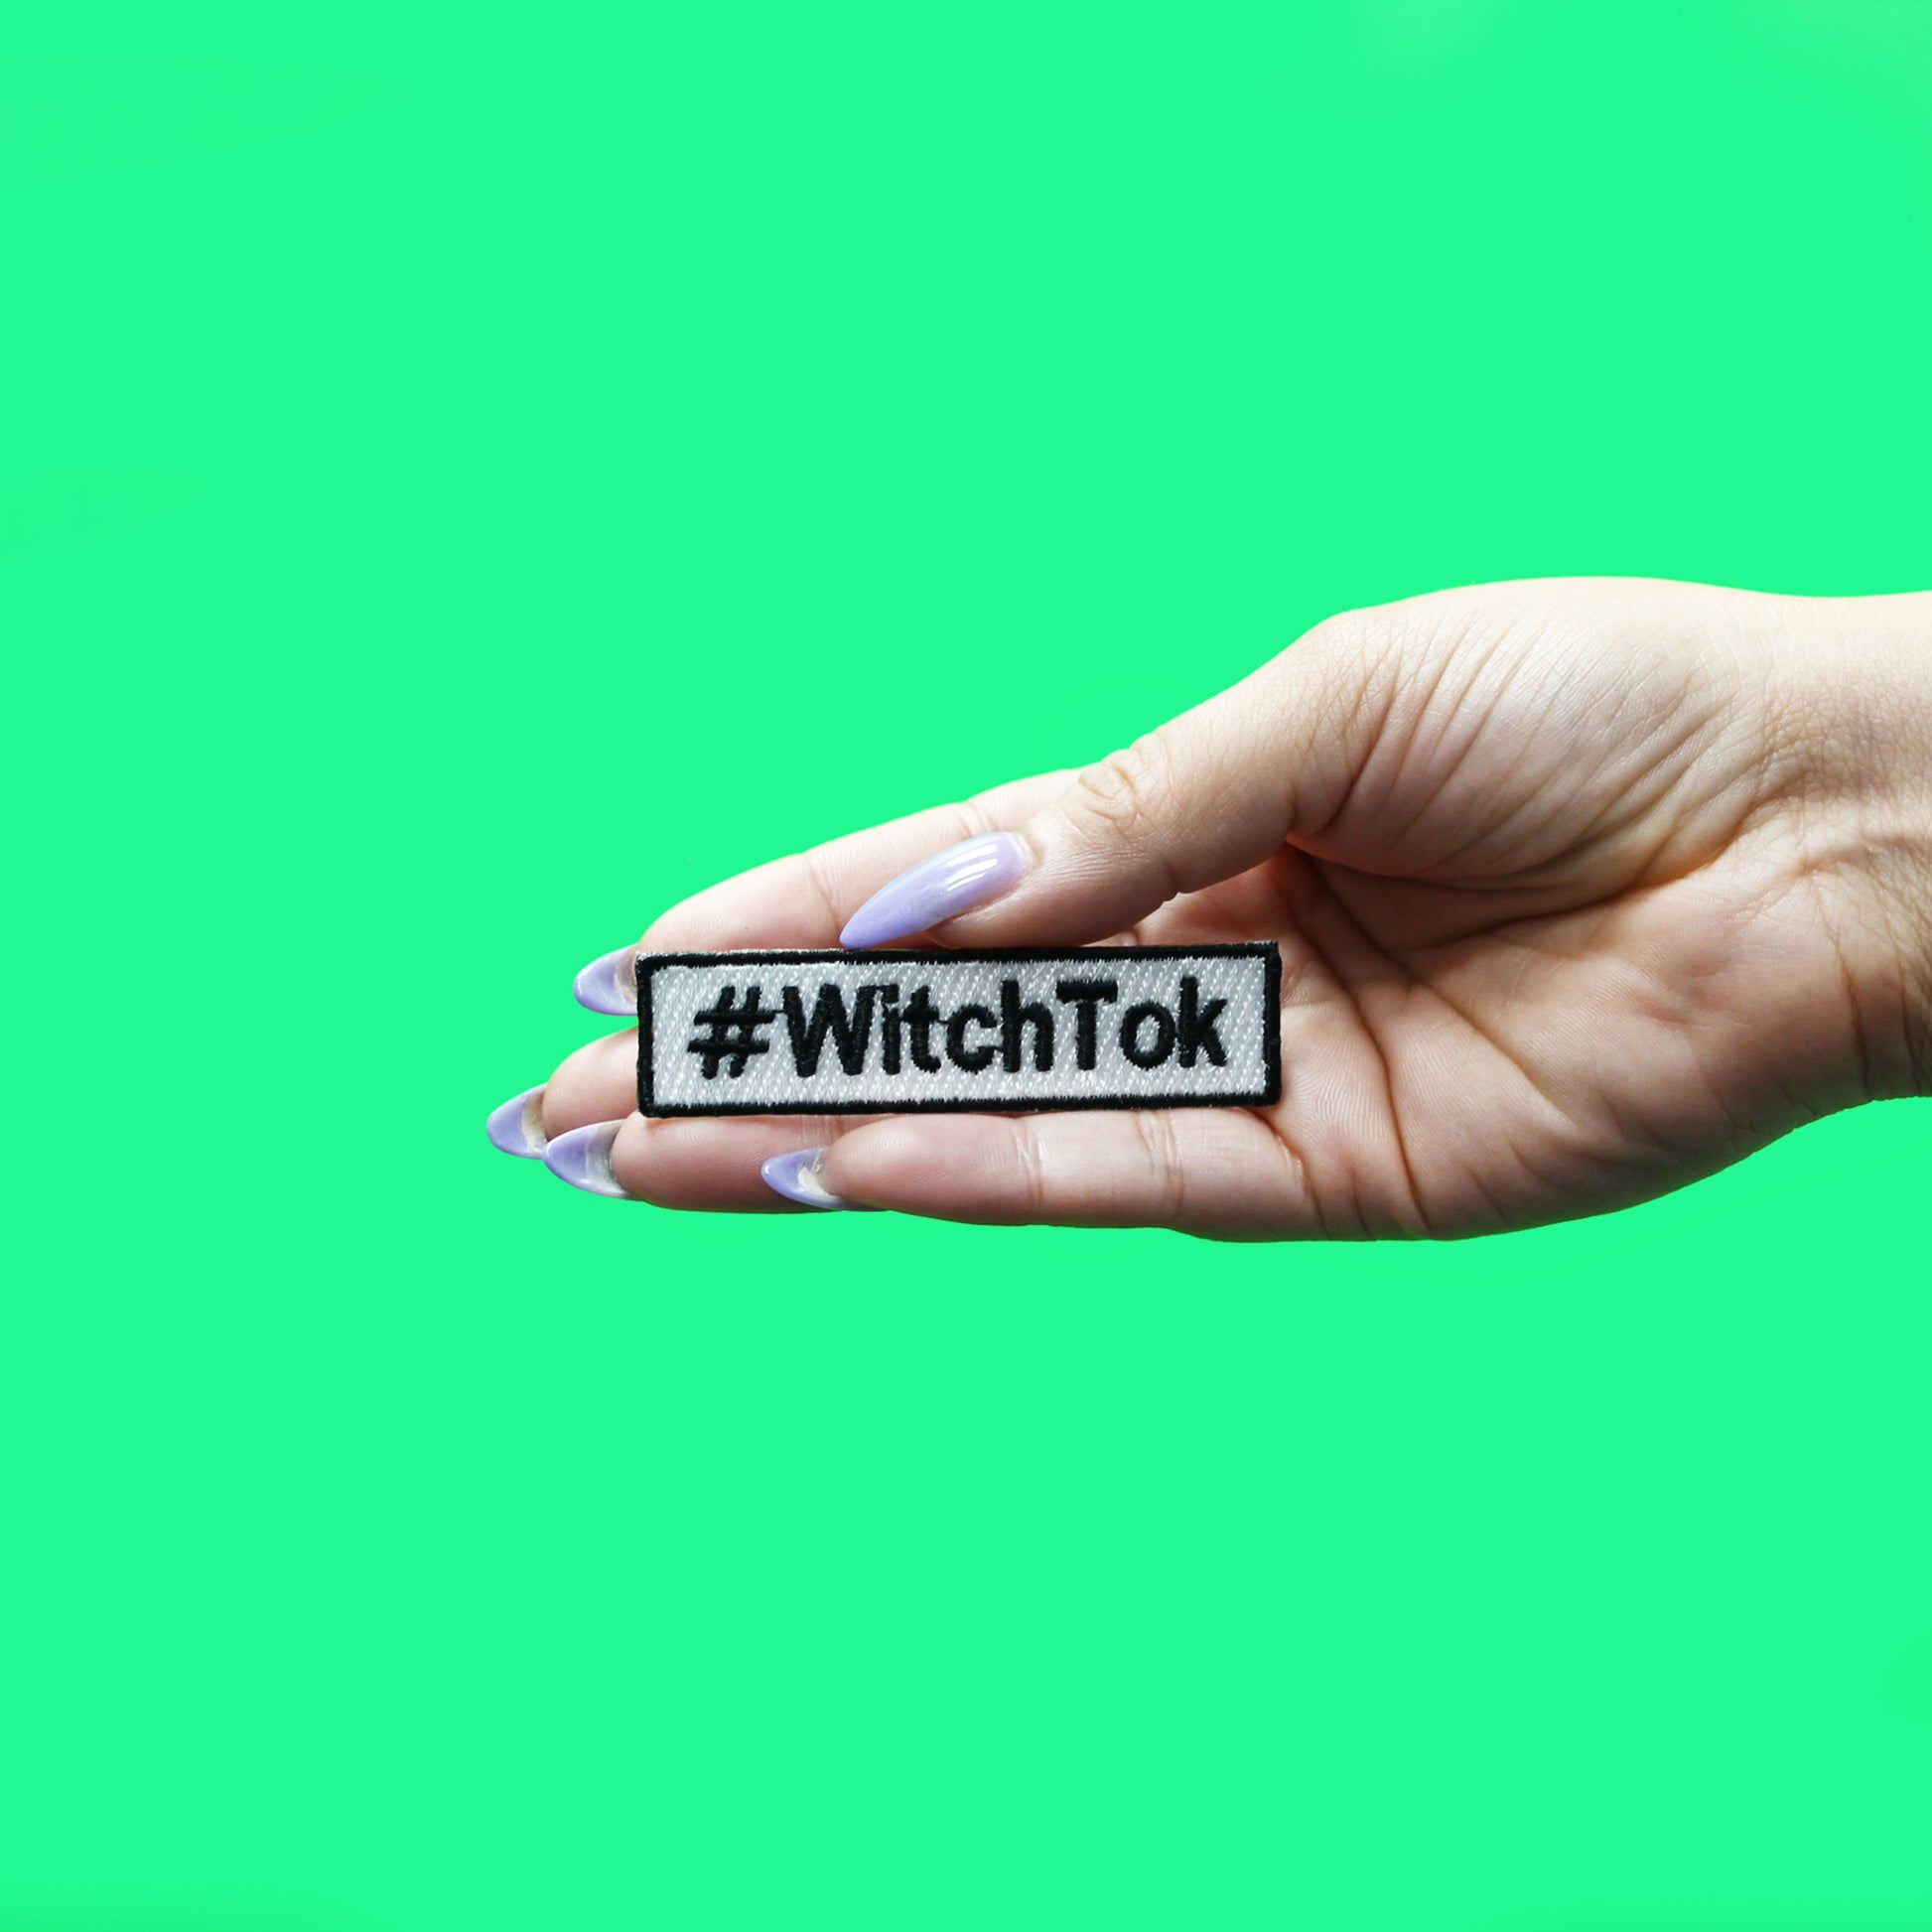 #WitchTok Patch Popular Hashtag Embroidered Iron On 